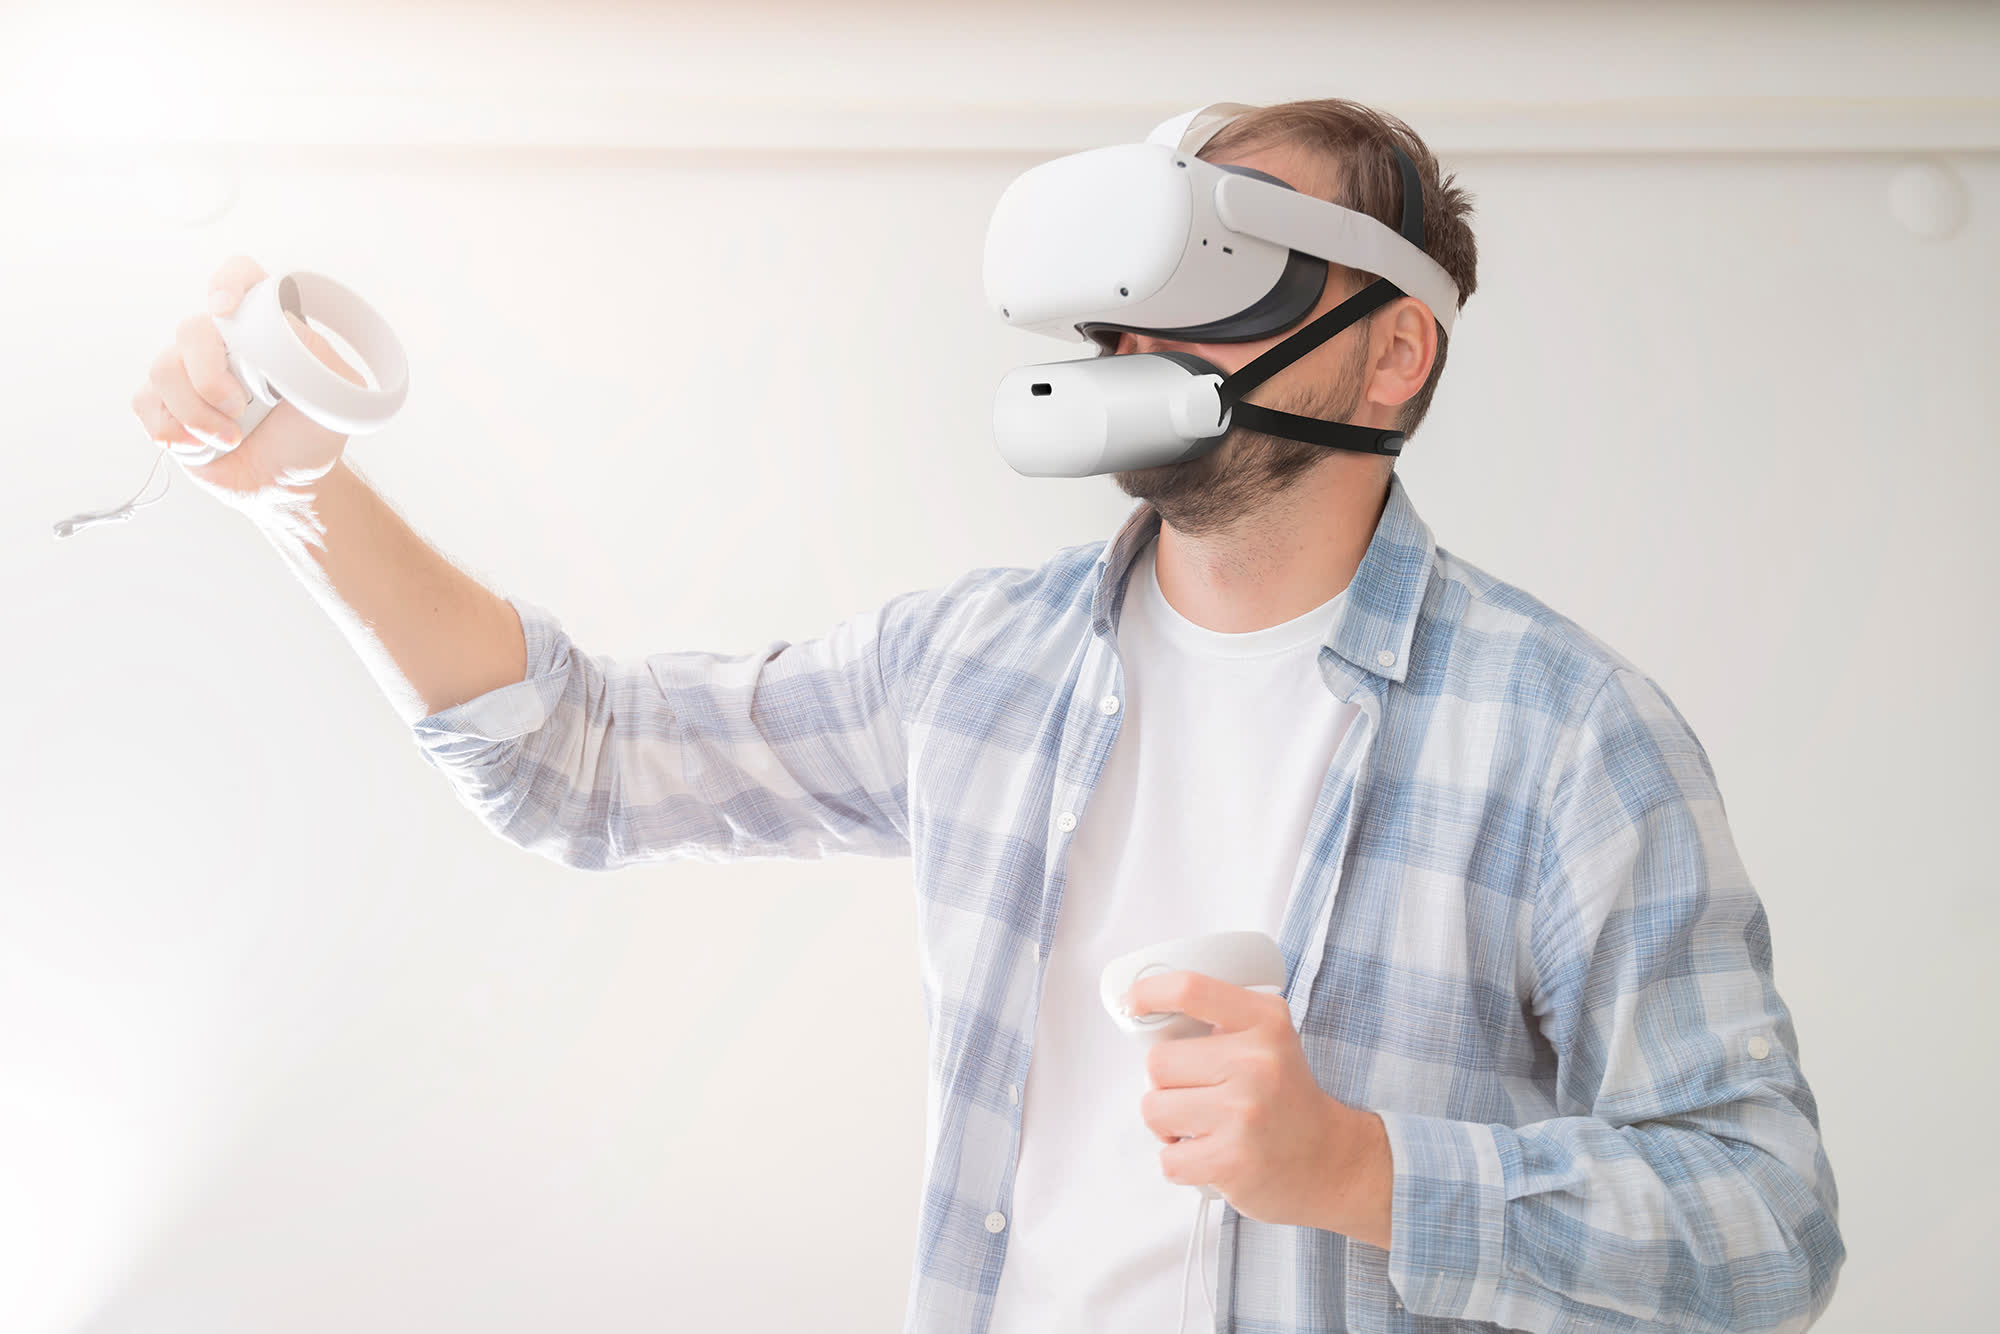 This $200 VR muzzle lets you strap a second bulky device to your head